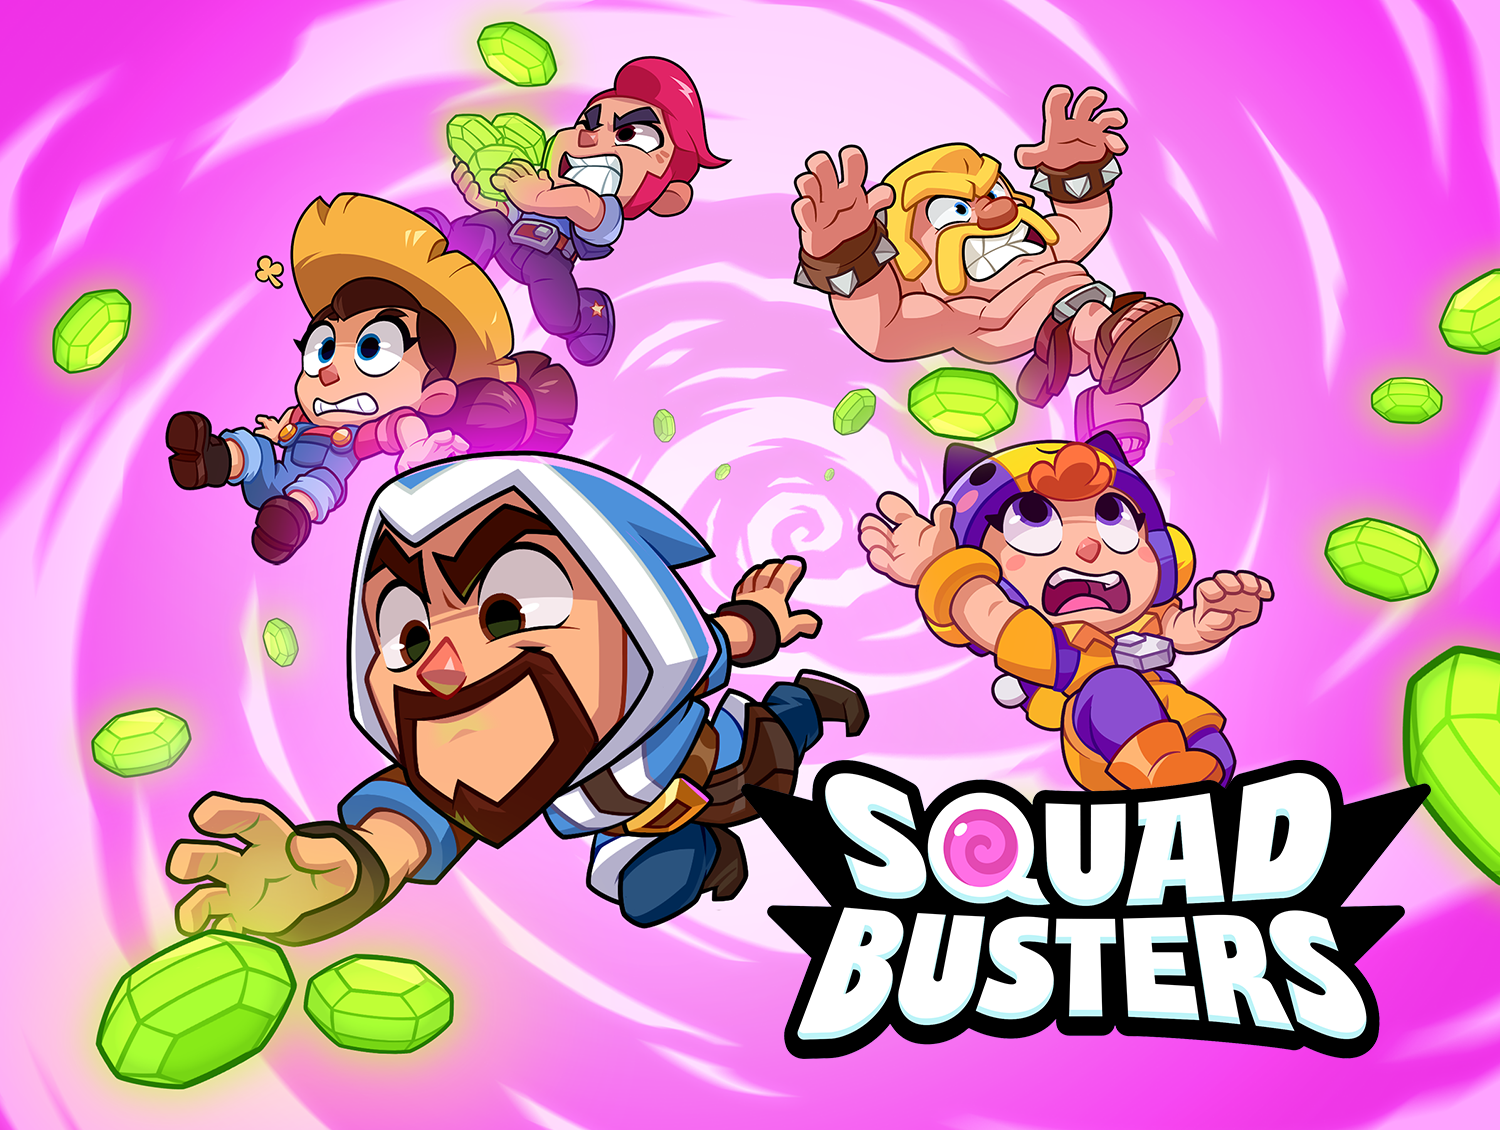 Greetings from the Makers of Squad Busters